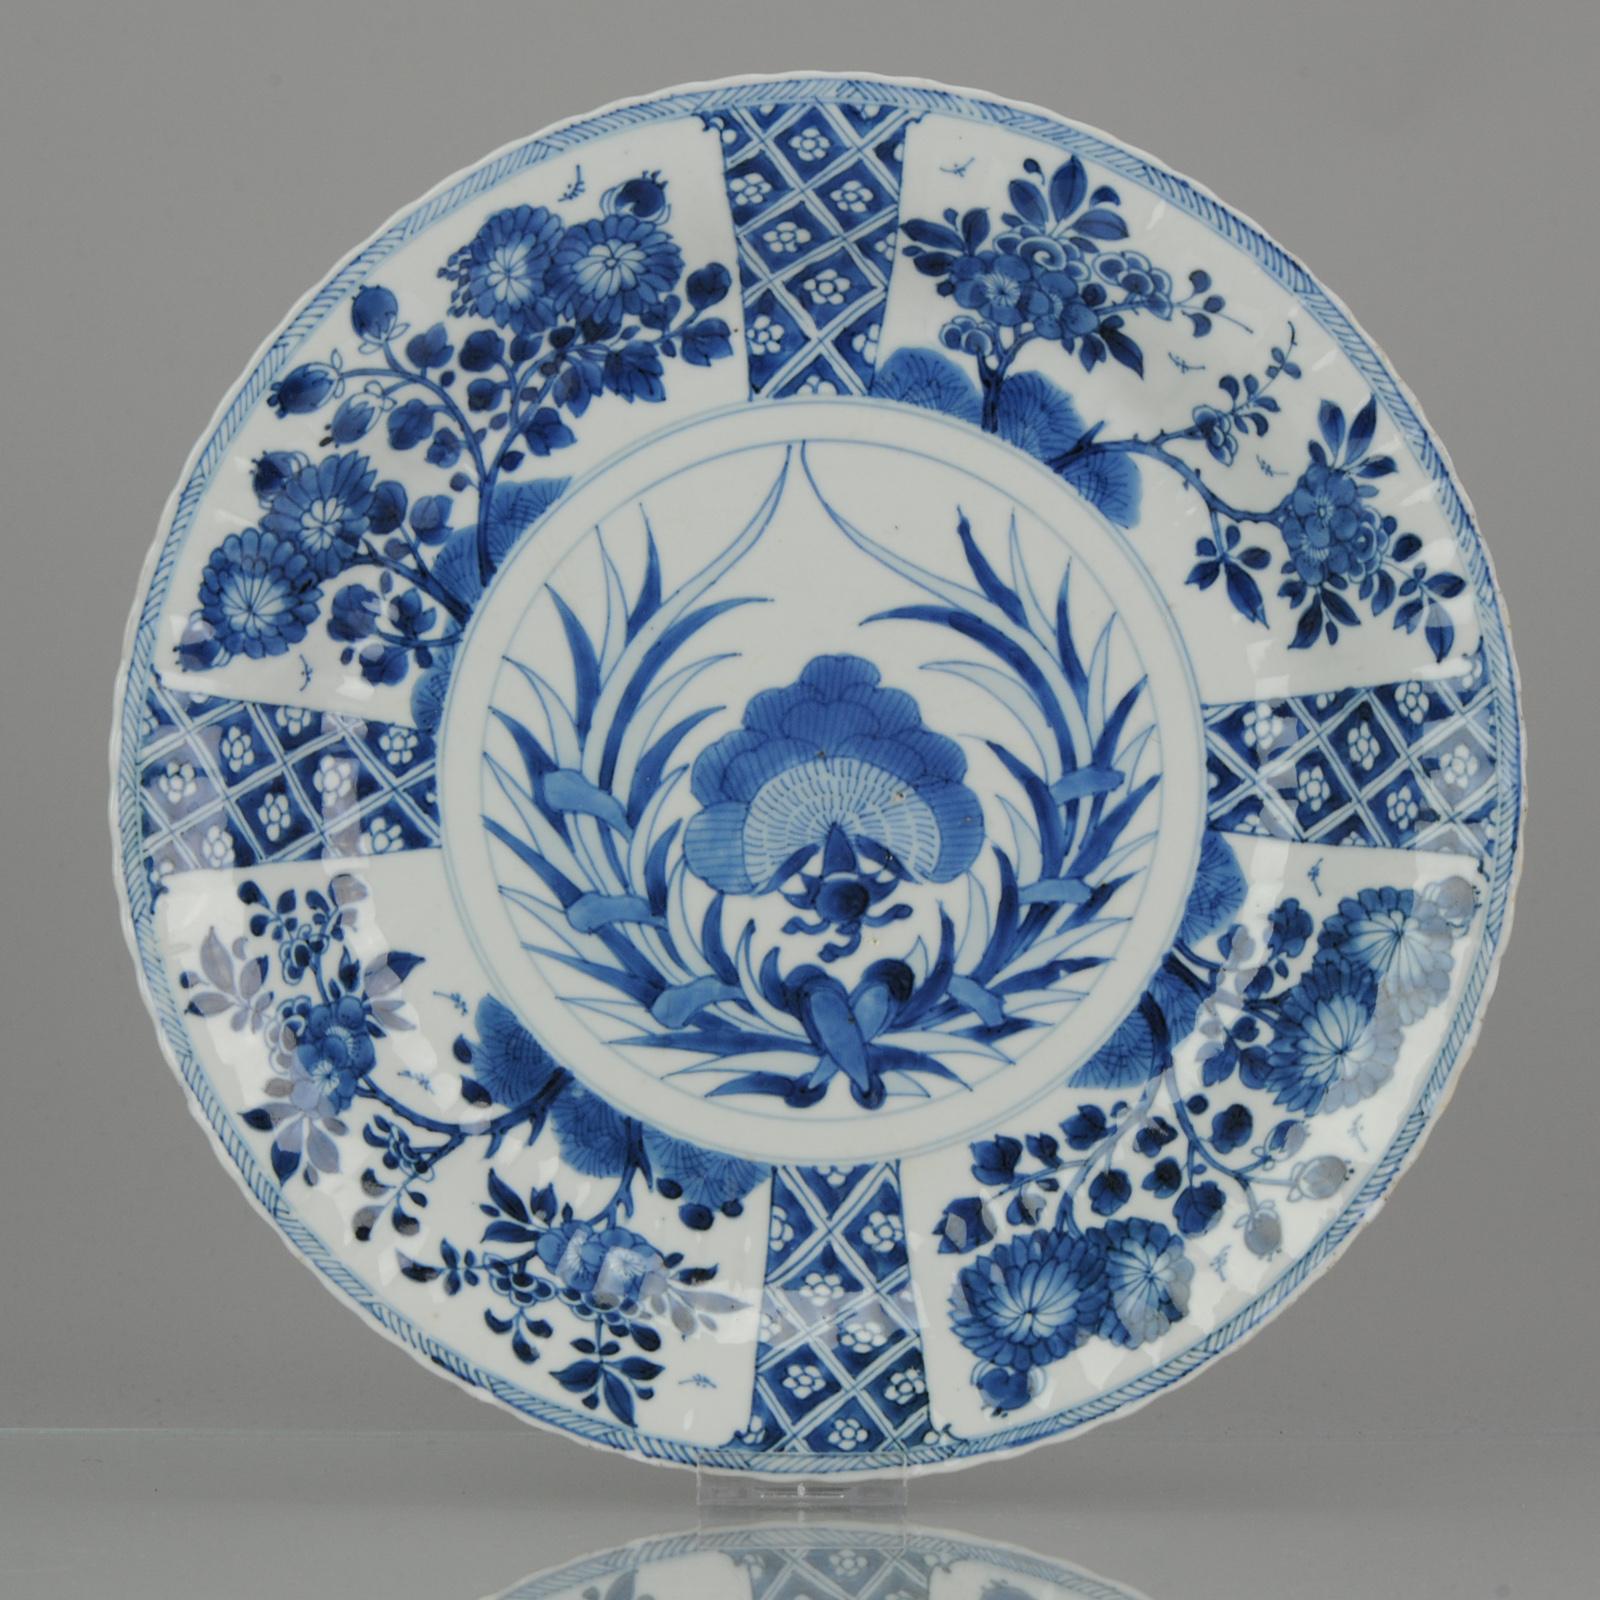 Large and very nice blue and white plate with a stunning flower scene to get lost in. Marked at the base. Real collectors item.

Very high quality cobalt and painting.

For similar examples of this listing see:

